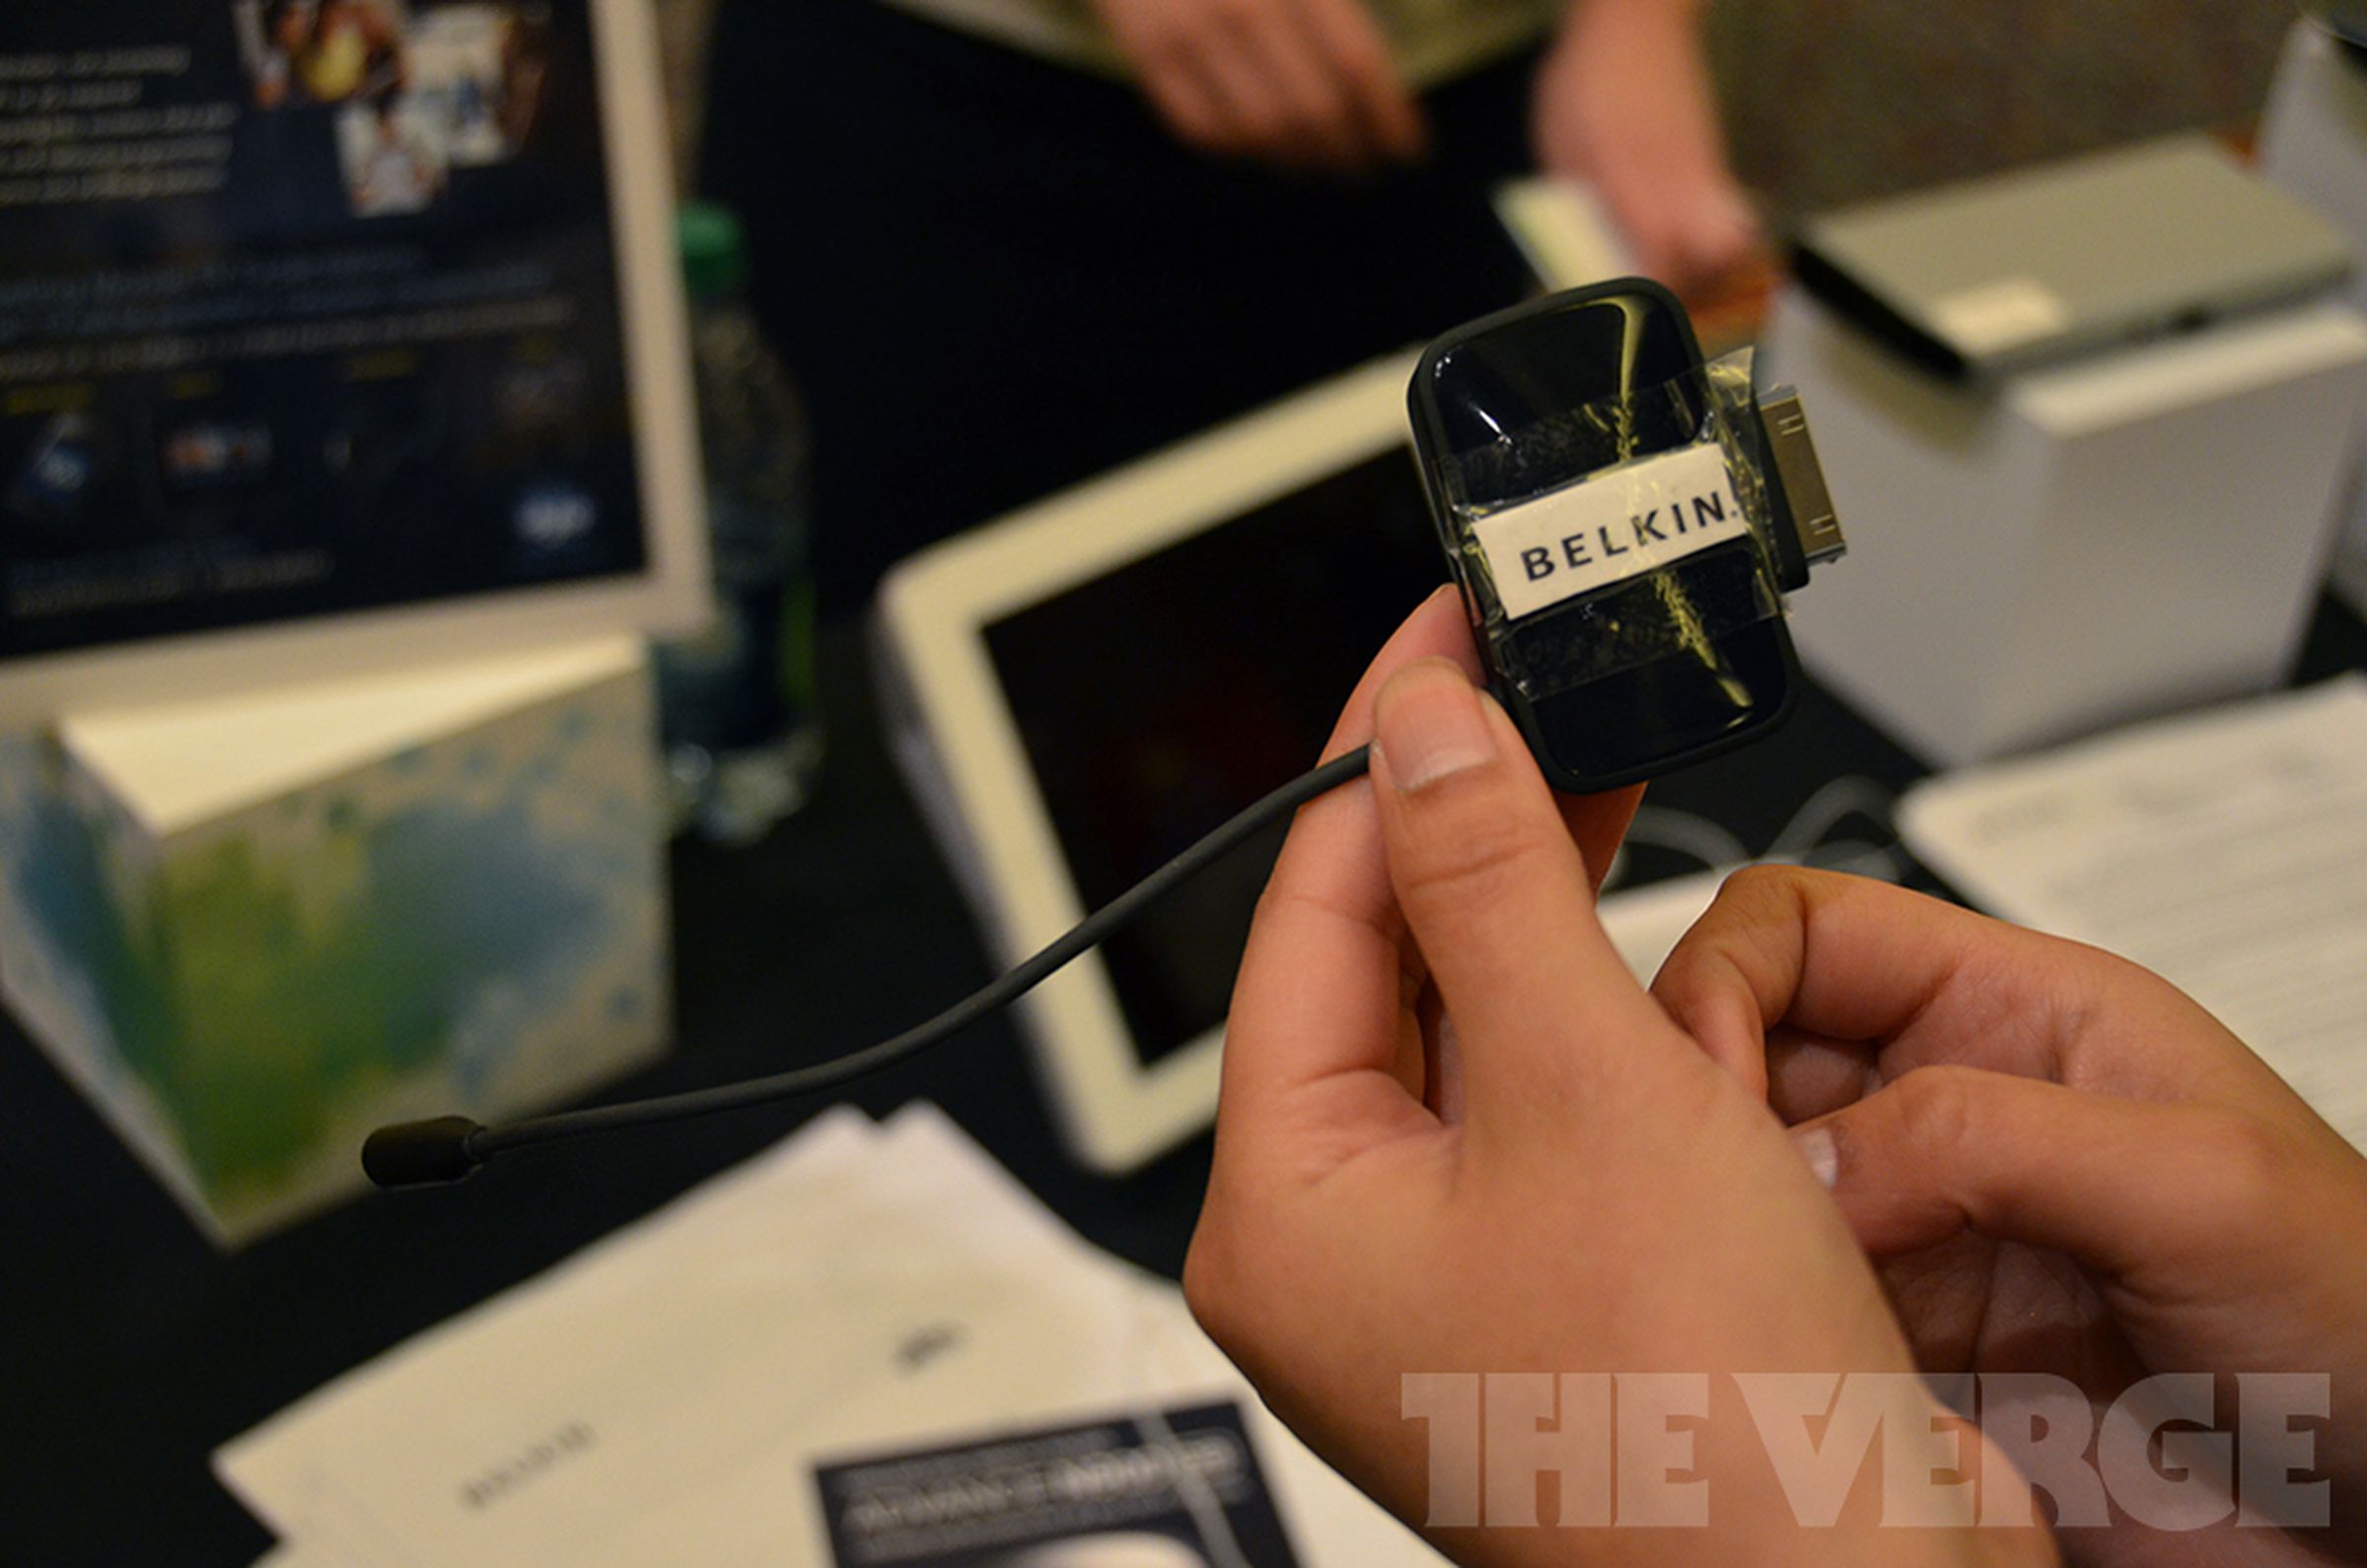 Belkin prototype iOS dongle for Dyle Mobile TV hands-on photos